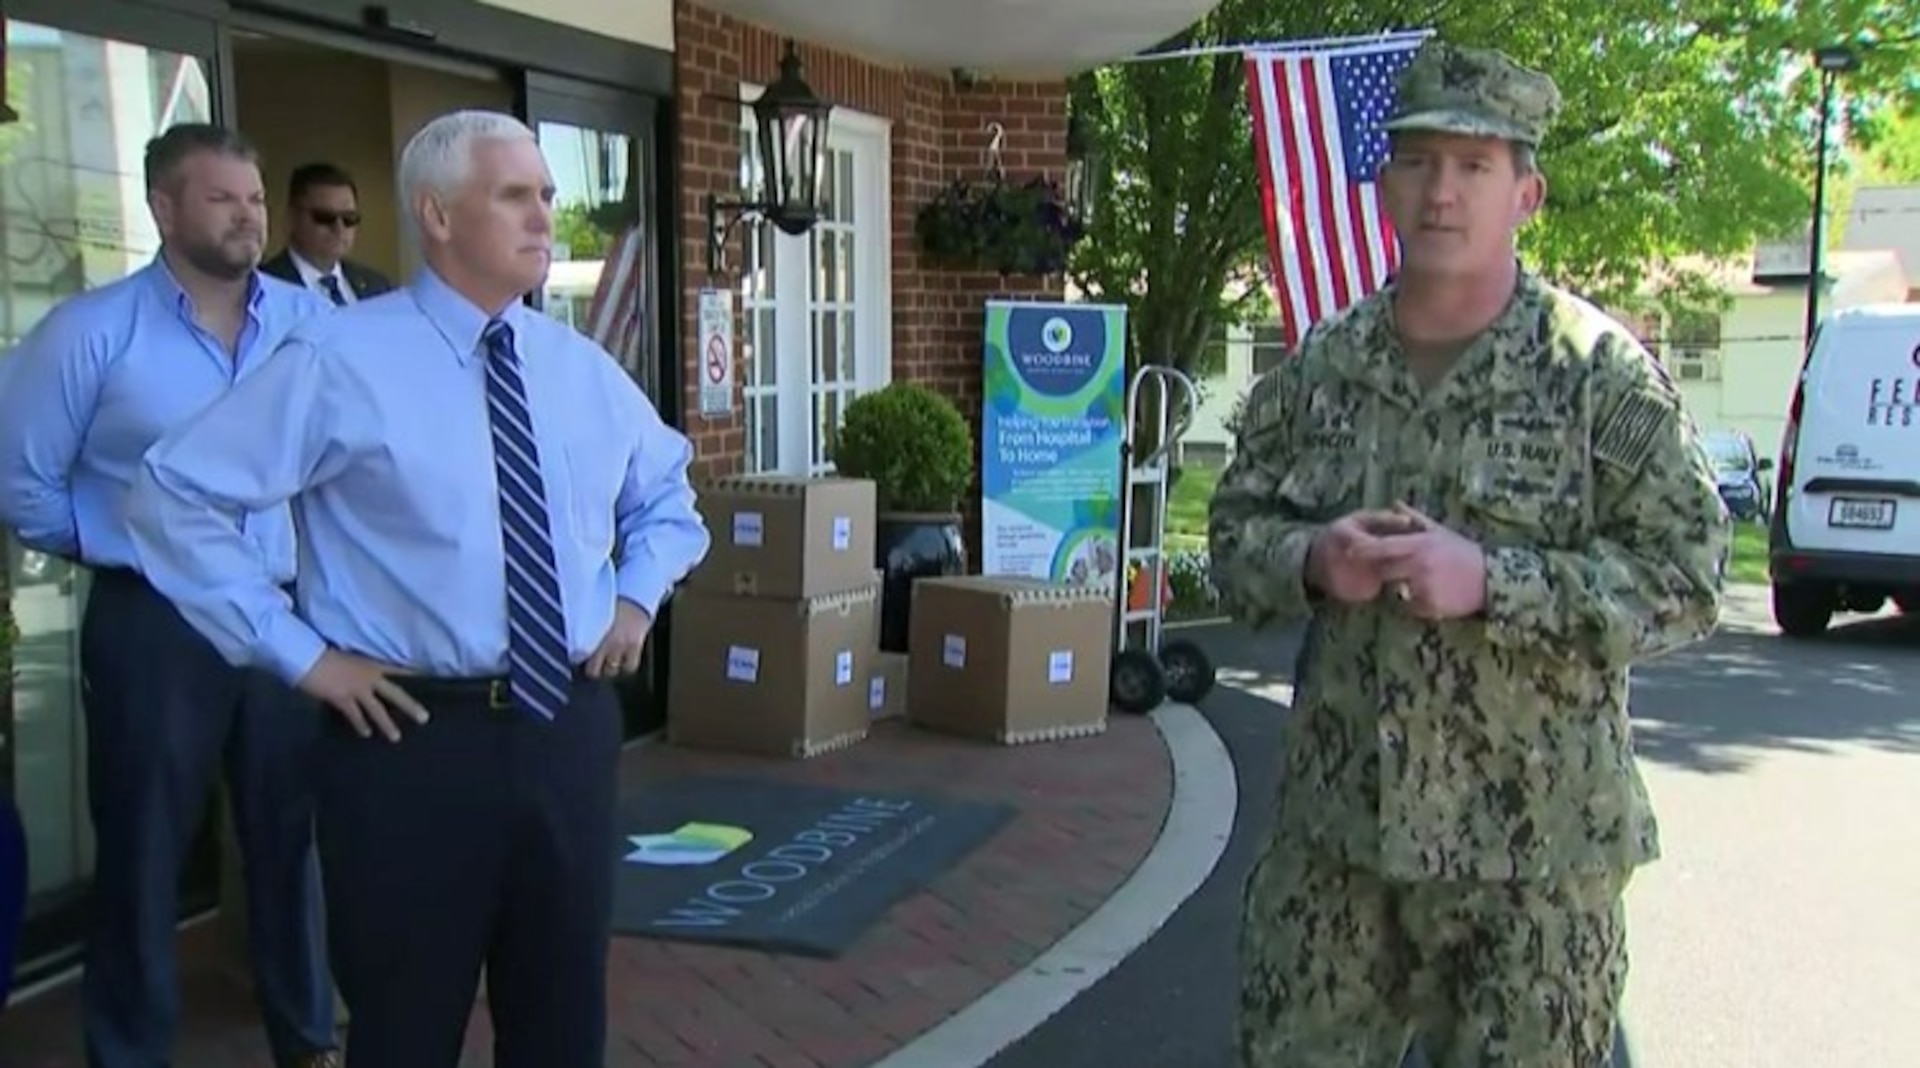 U.S. Navy Rear Admiral John Polowczyk, Federal Emergency Management Agency Supply Chain Task Force Lead speaks to the media as Vice President Michael Pence looks on in front Woodbine Rehabilitation & Healthcare Center, Alexandria, Va. where the first of $134 million worth of personal protective equipment kits were delivered May 7. The Defense Logistics Agency ordered the kits, which will be delivered to approximately 15,000 nursing homes throughout the U.S., to provide medical staff members with 14-days worth of protective eyewear, medical gowns, masks and nitrite gloves. The items were requested by the White House Coronavirus Task Force and funded by FEMA.